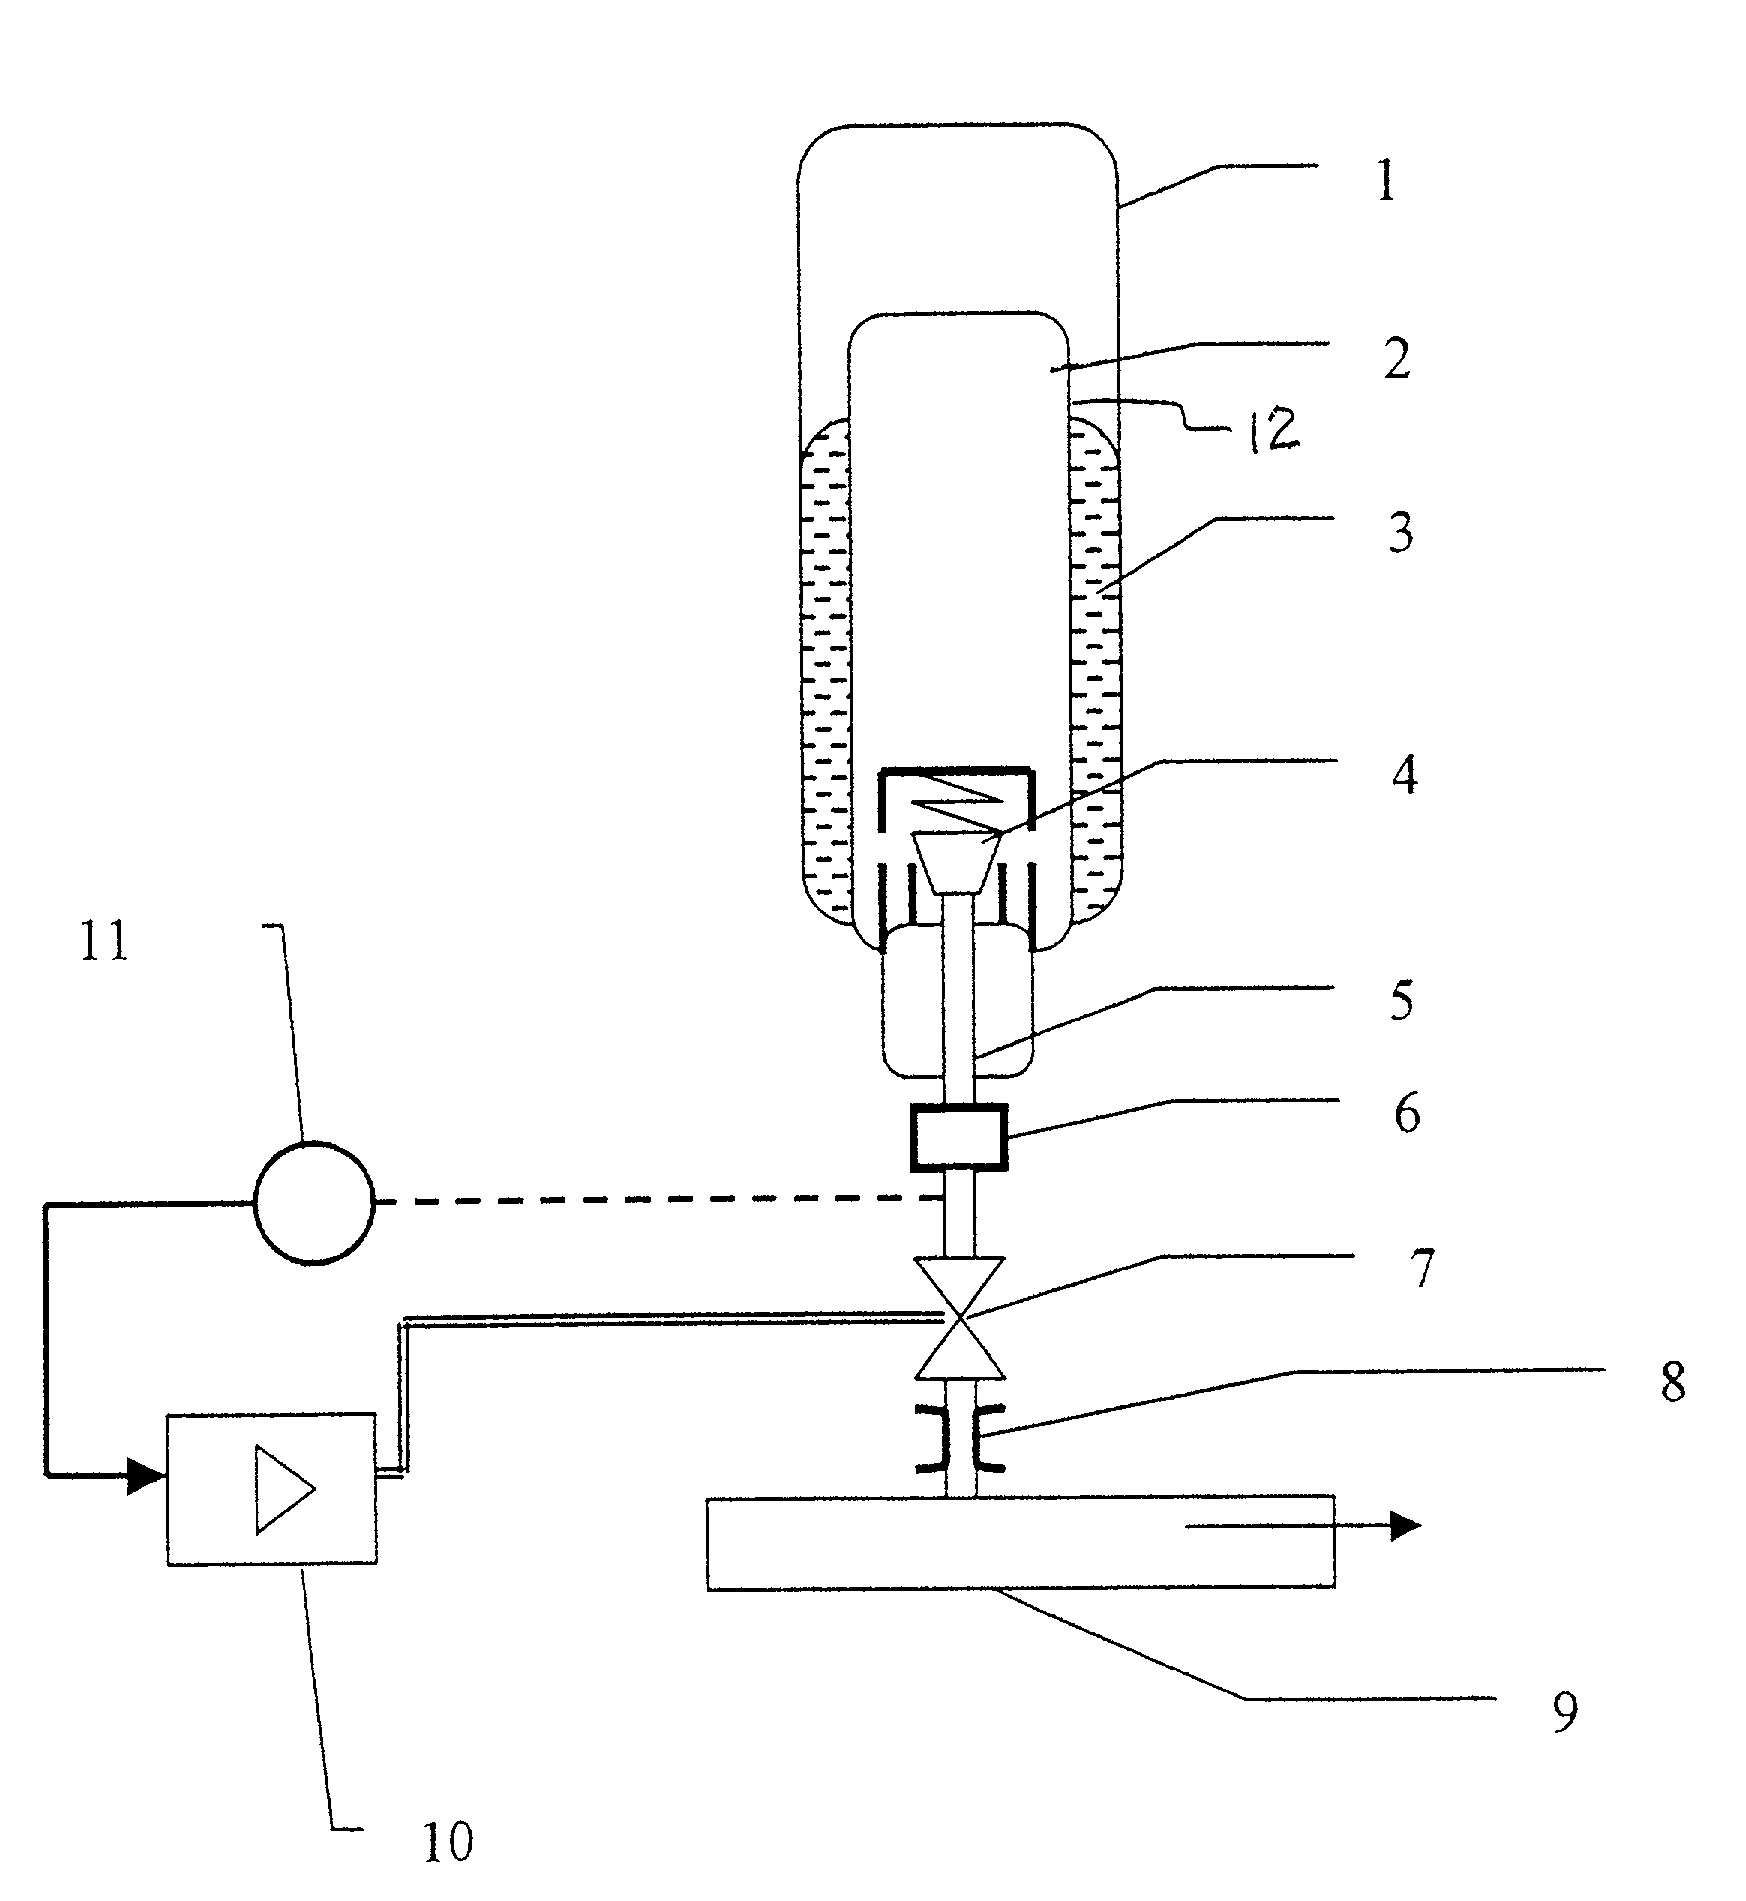 Anesthetic metering system